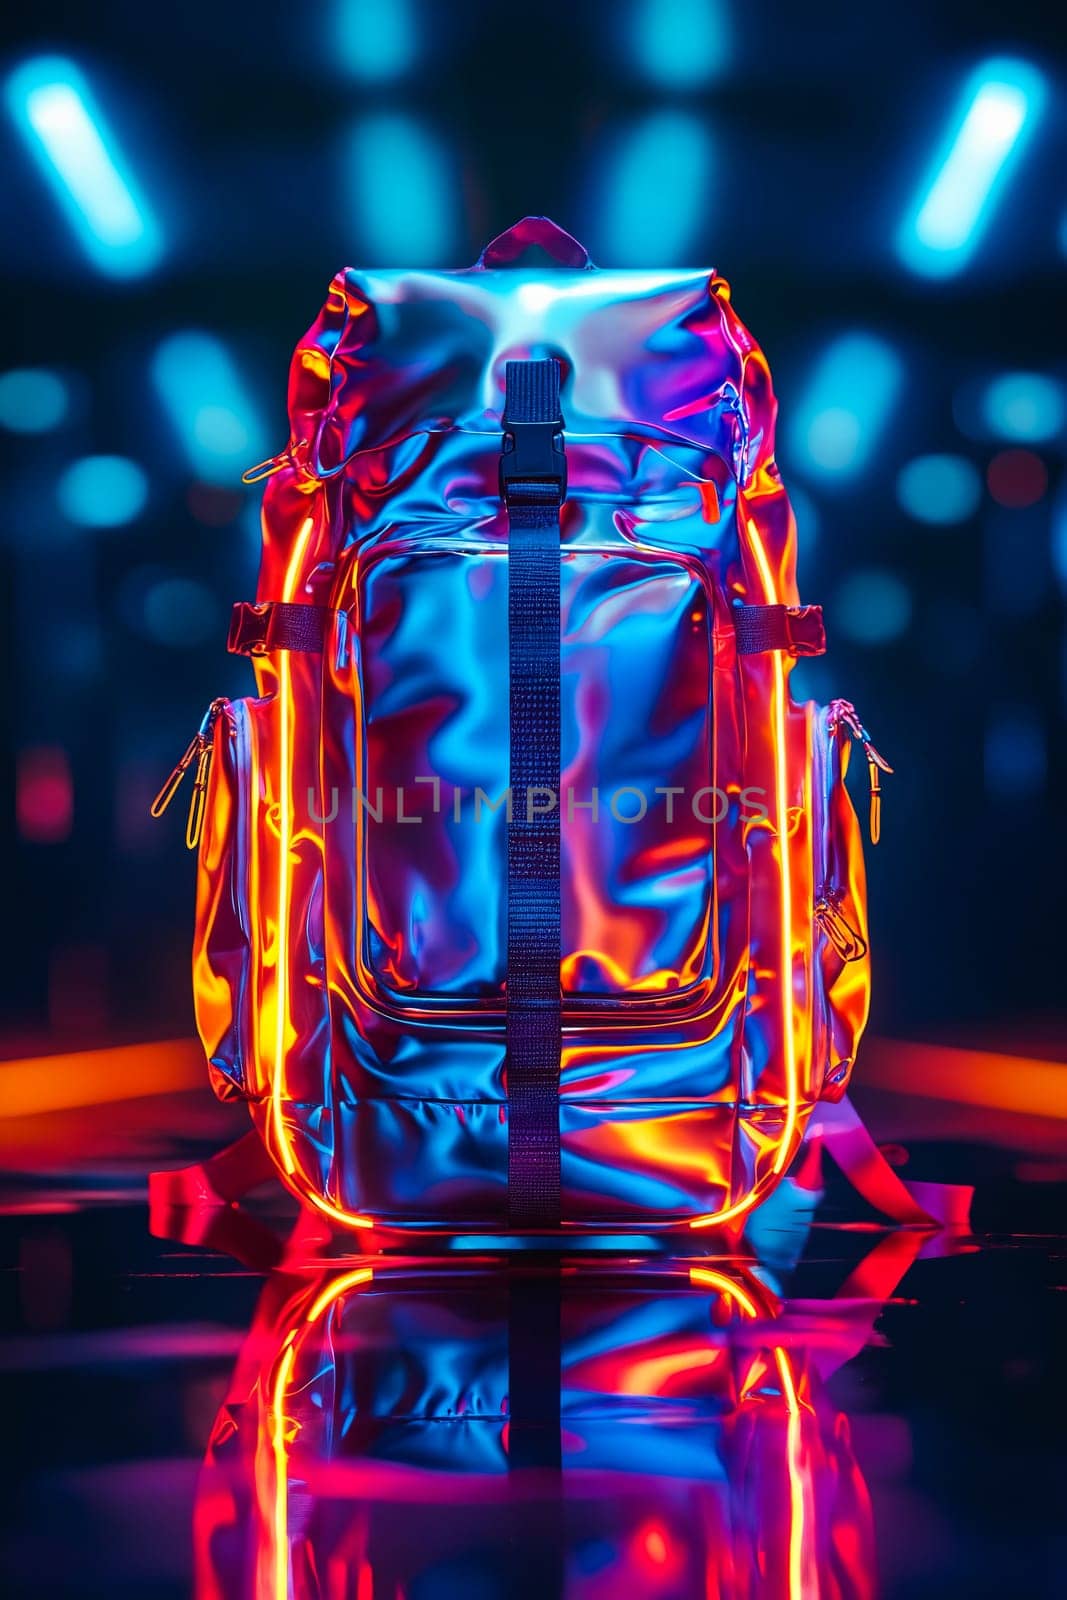 A backpack is lit up in neon colors. The backpack is sitting on a reflective surface, and the lights behind it create a surreal and futuristic atmosphere. The backpack is the main focus of the image. Generative AI